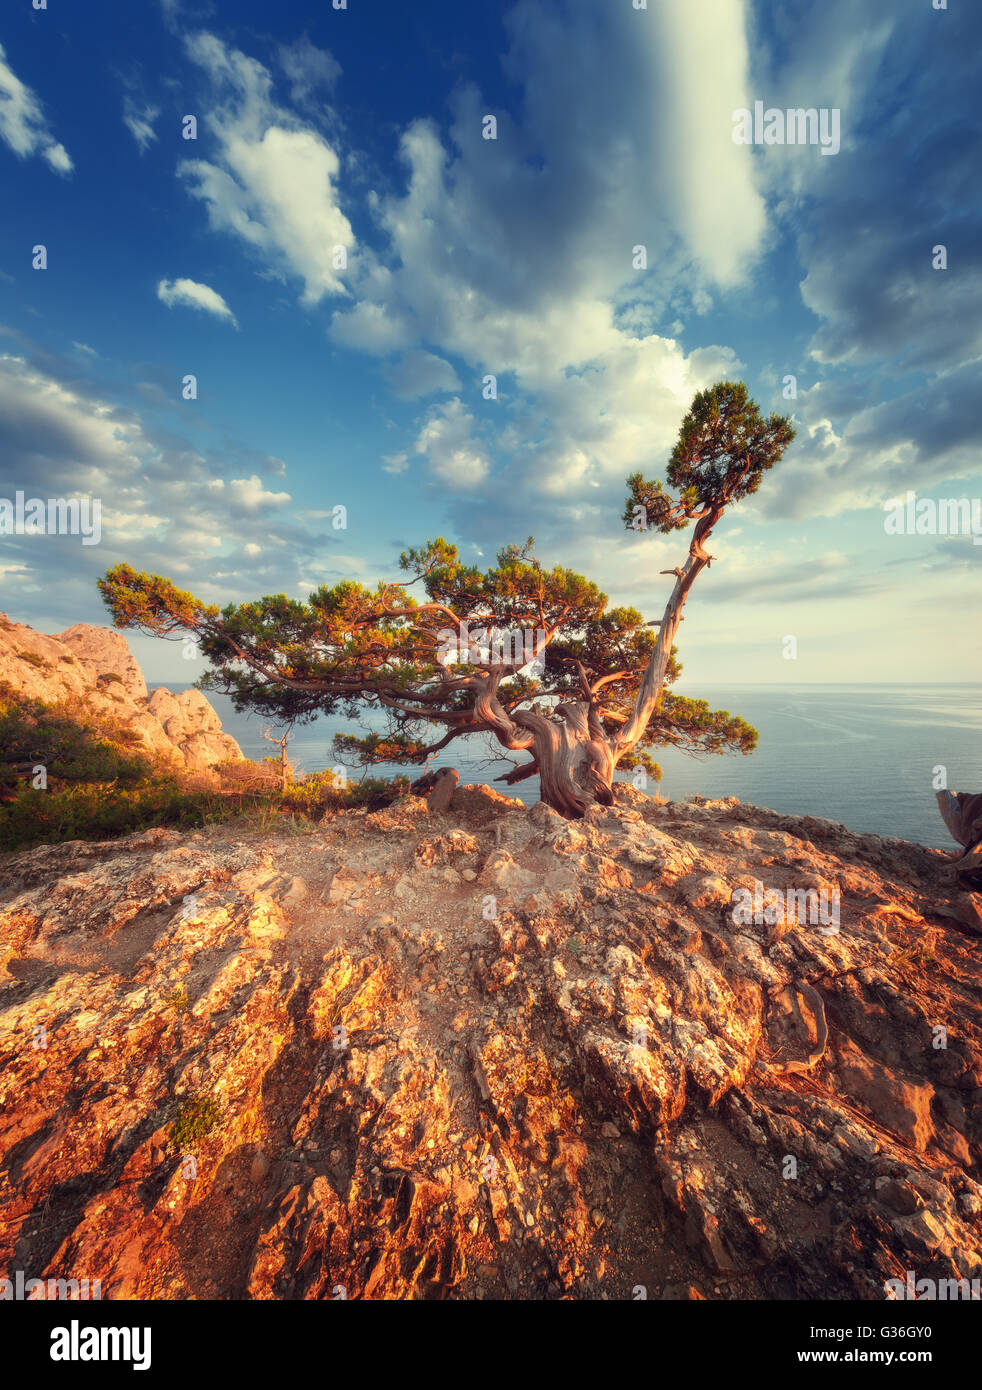 Landscape with beautiful tree on the mountain, blue sky and sea at sunrise Stock Photo